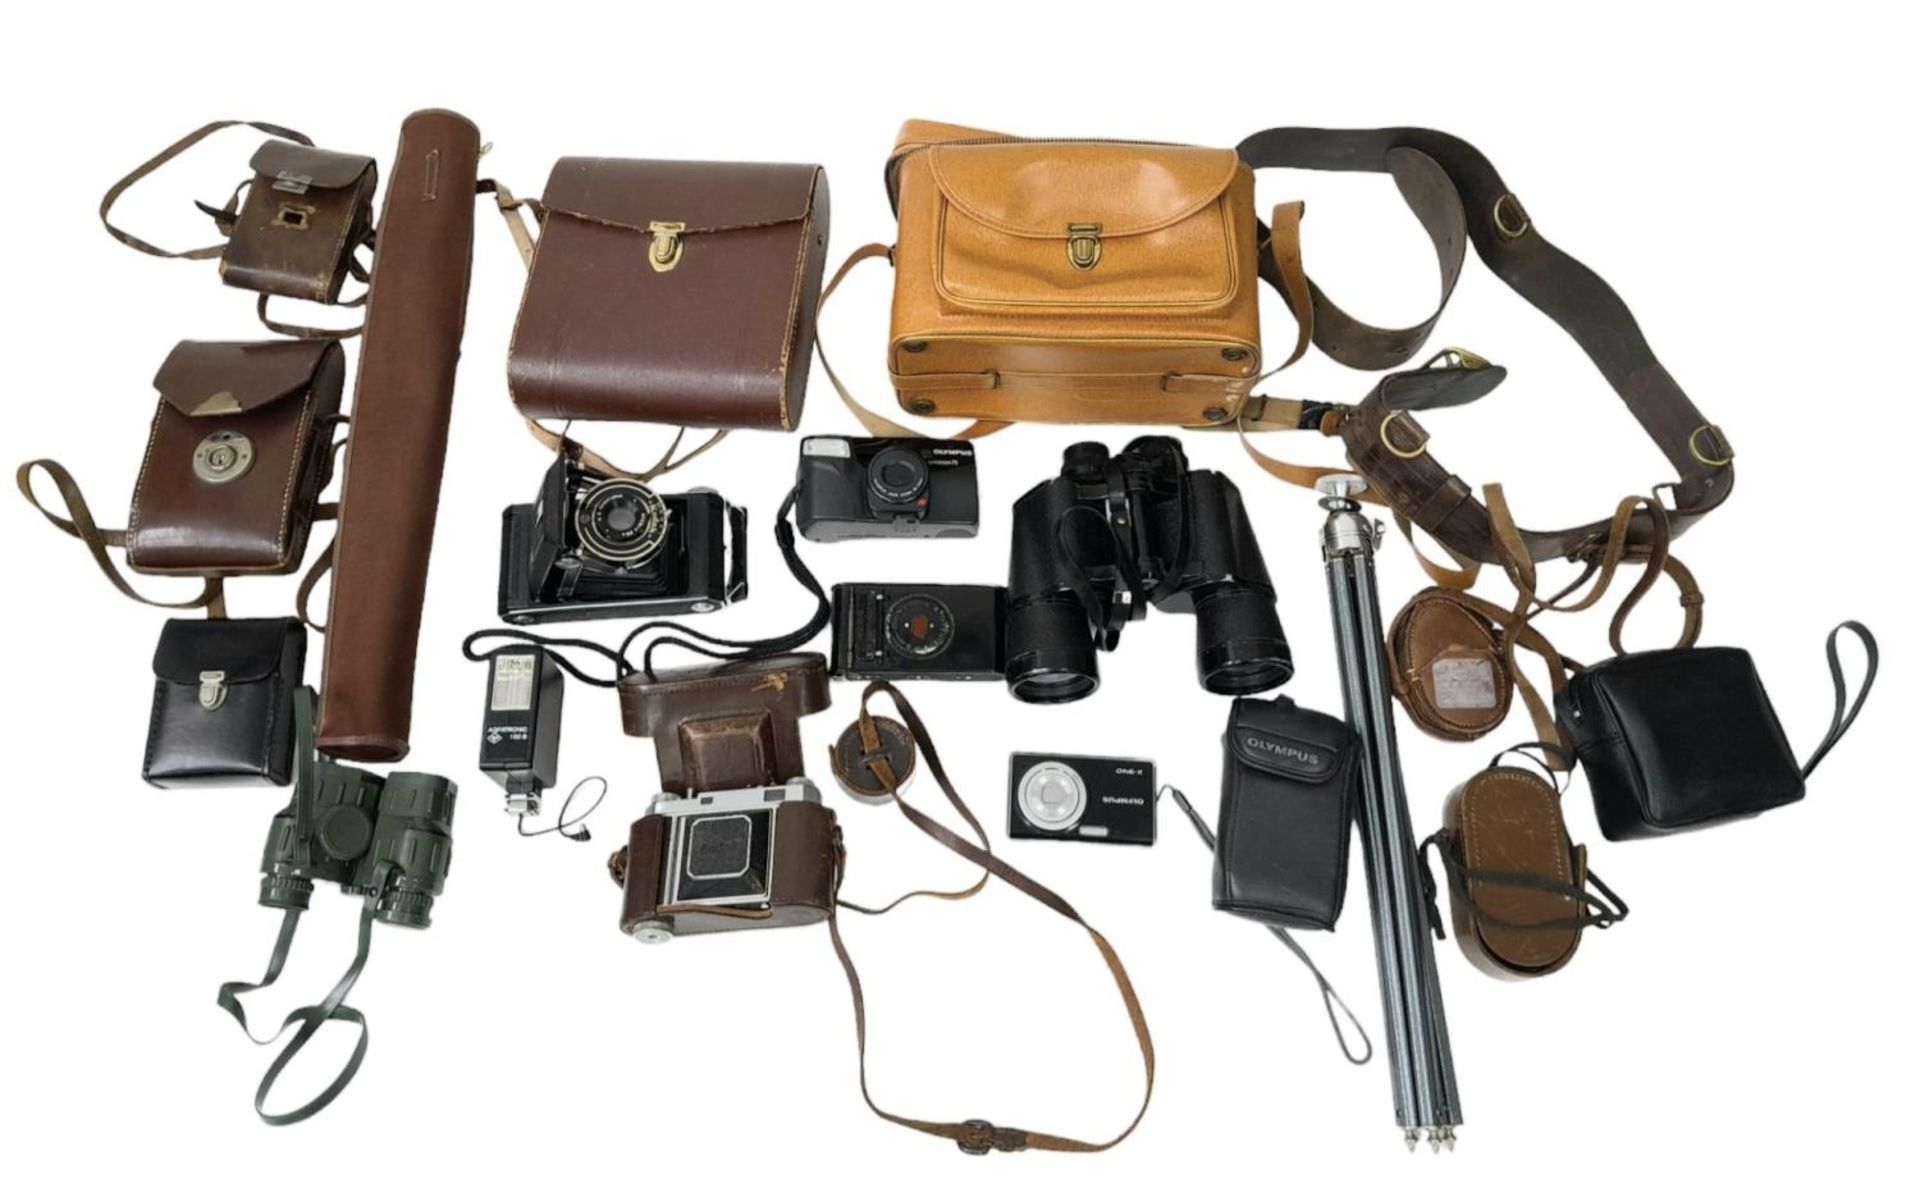 A Vintage Collection of Cameras, Camera Accessories and Binoculars. As found